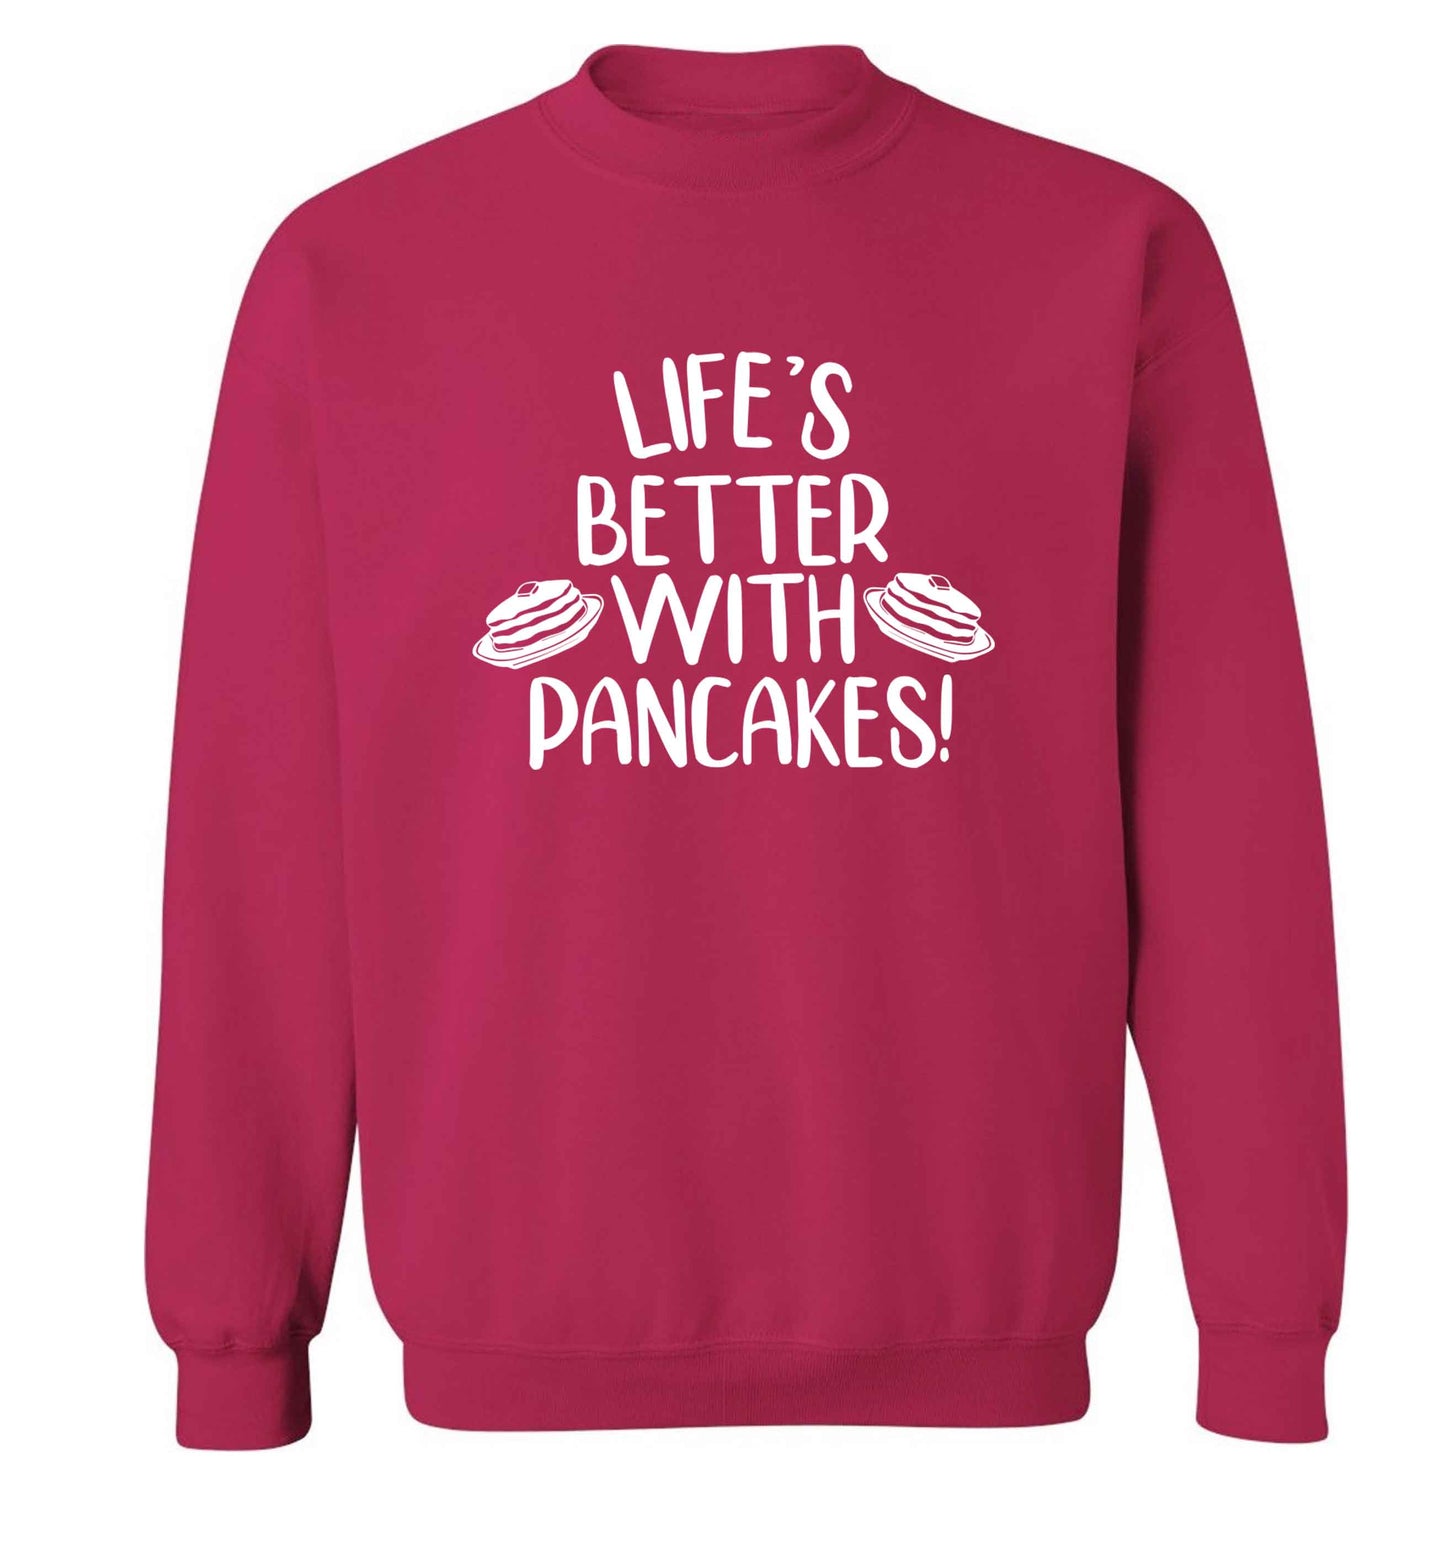 Life's better with pancakes adult's unisex pink sweater 2XL